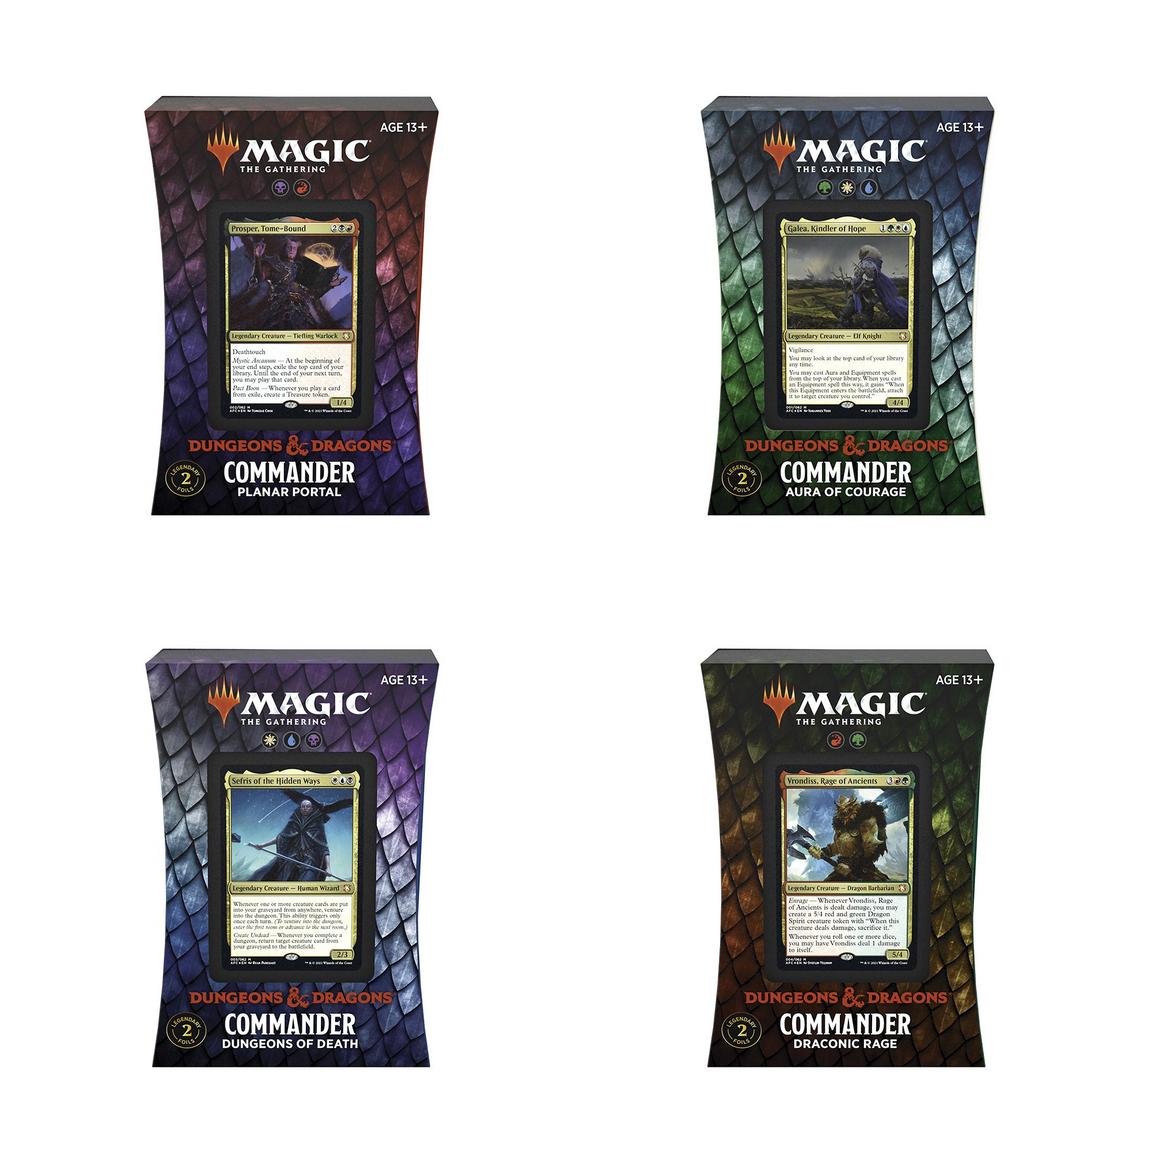 Magic: The Gathering Dungeons and Dragons Forgotten Realms Commander Deck (Assortment)